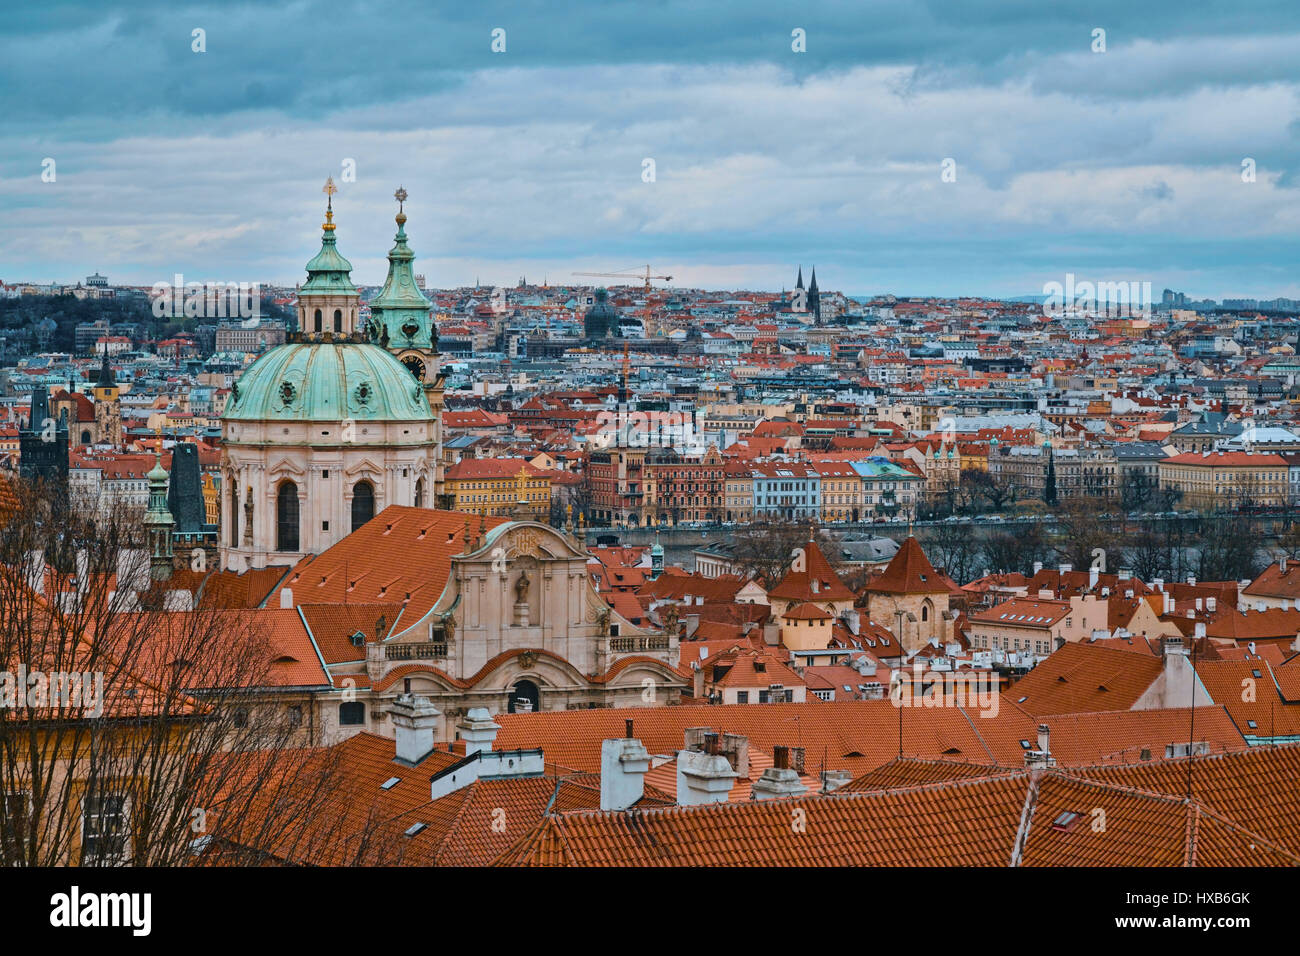 Wonderful city of Prague - aerial view from the castle Stock Photo